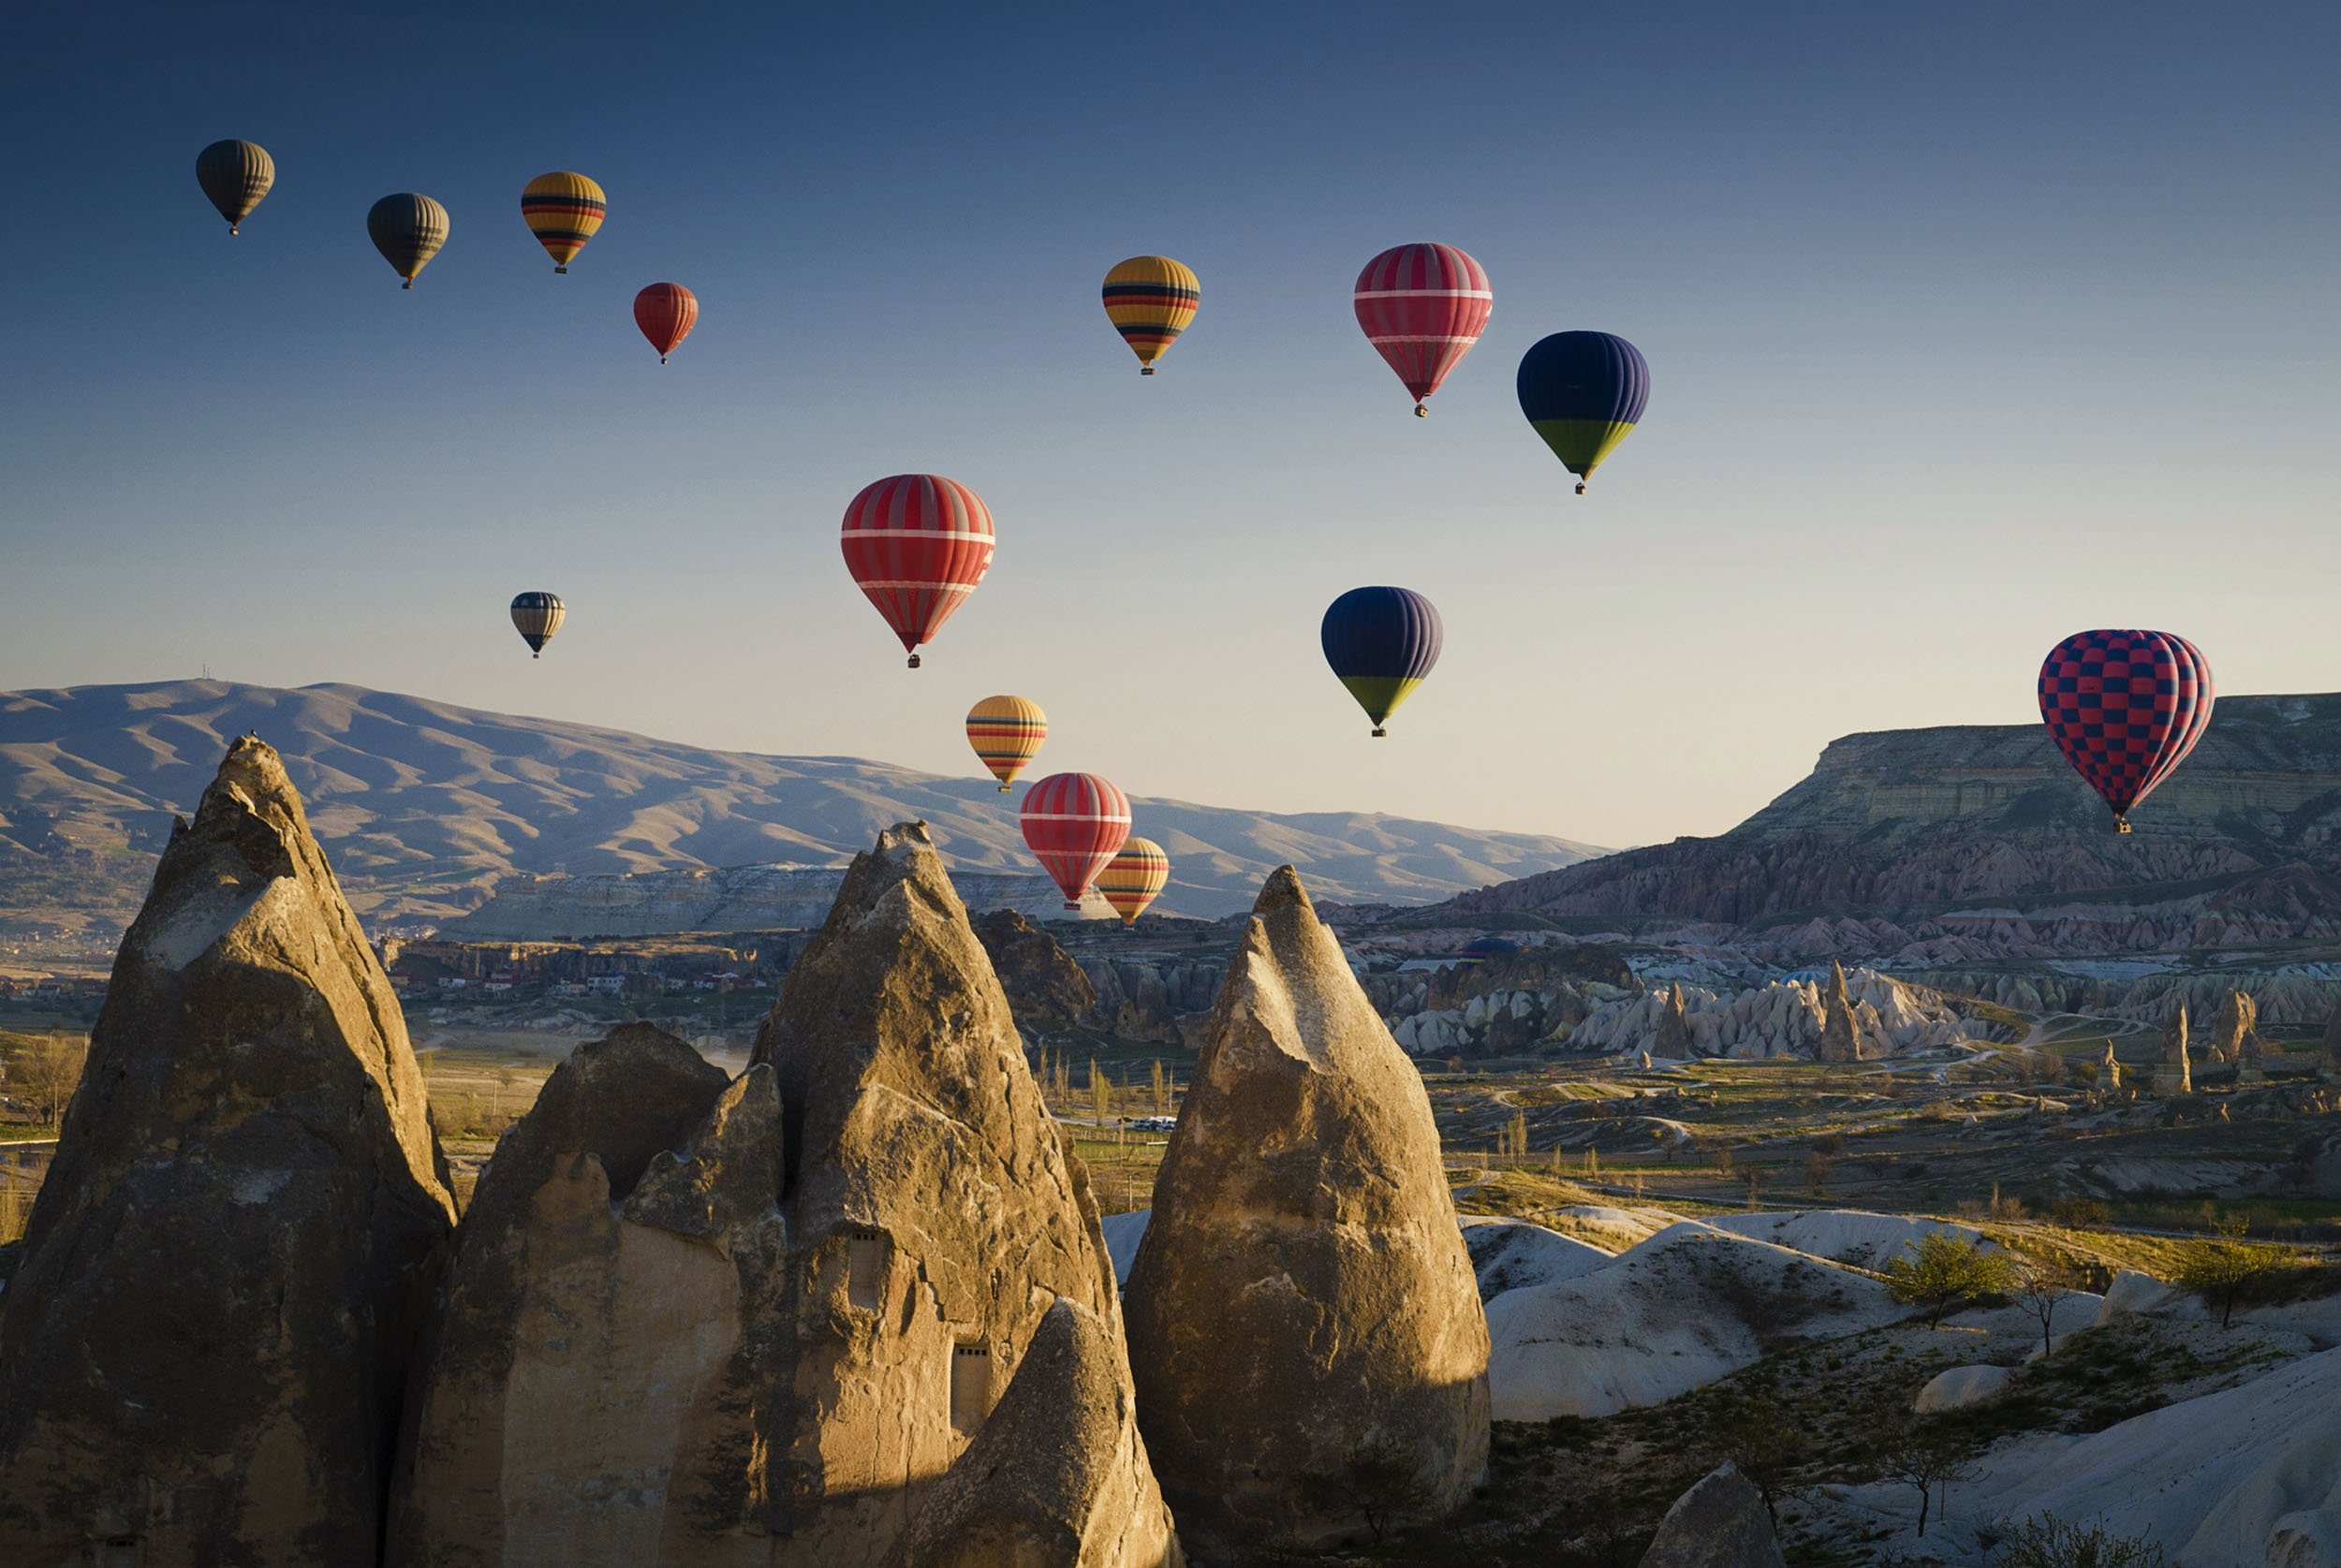 Magical towns to visit in Turkey's Cappadocia region | Daily Sabah